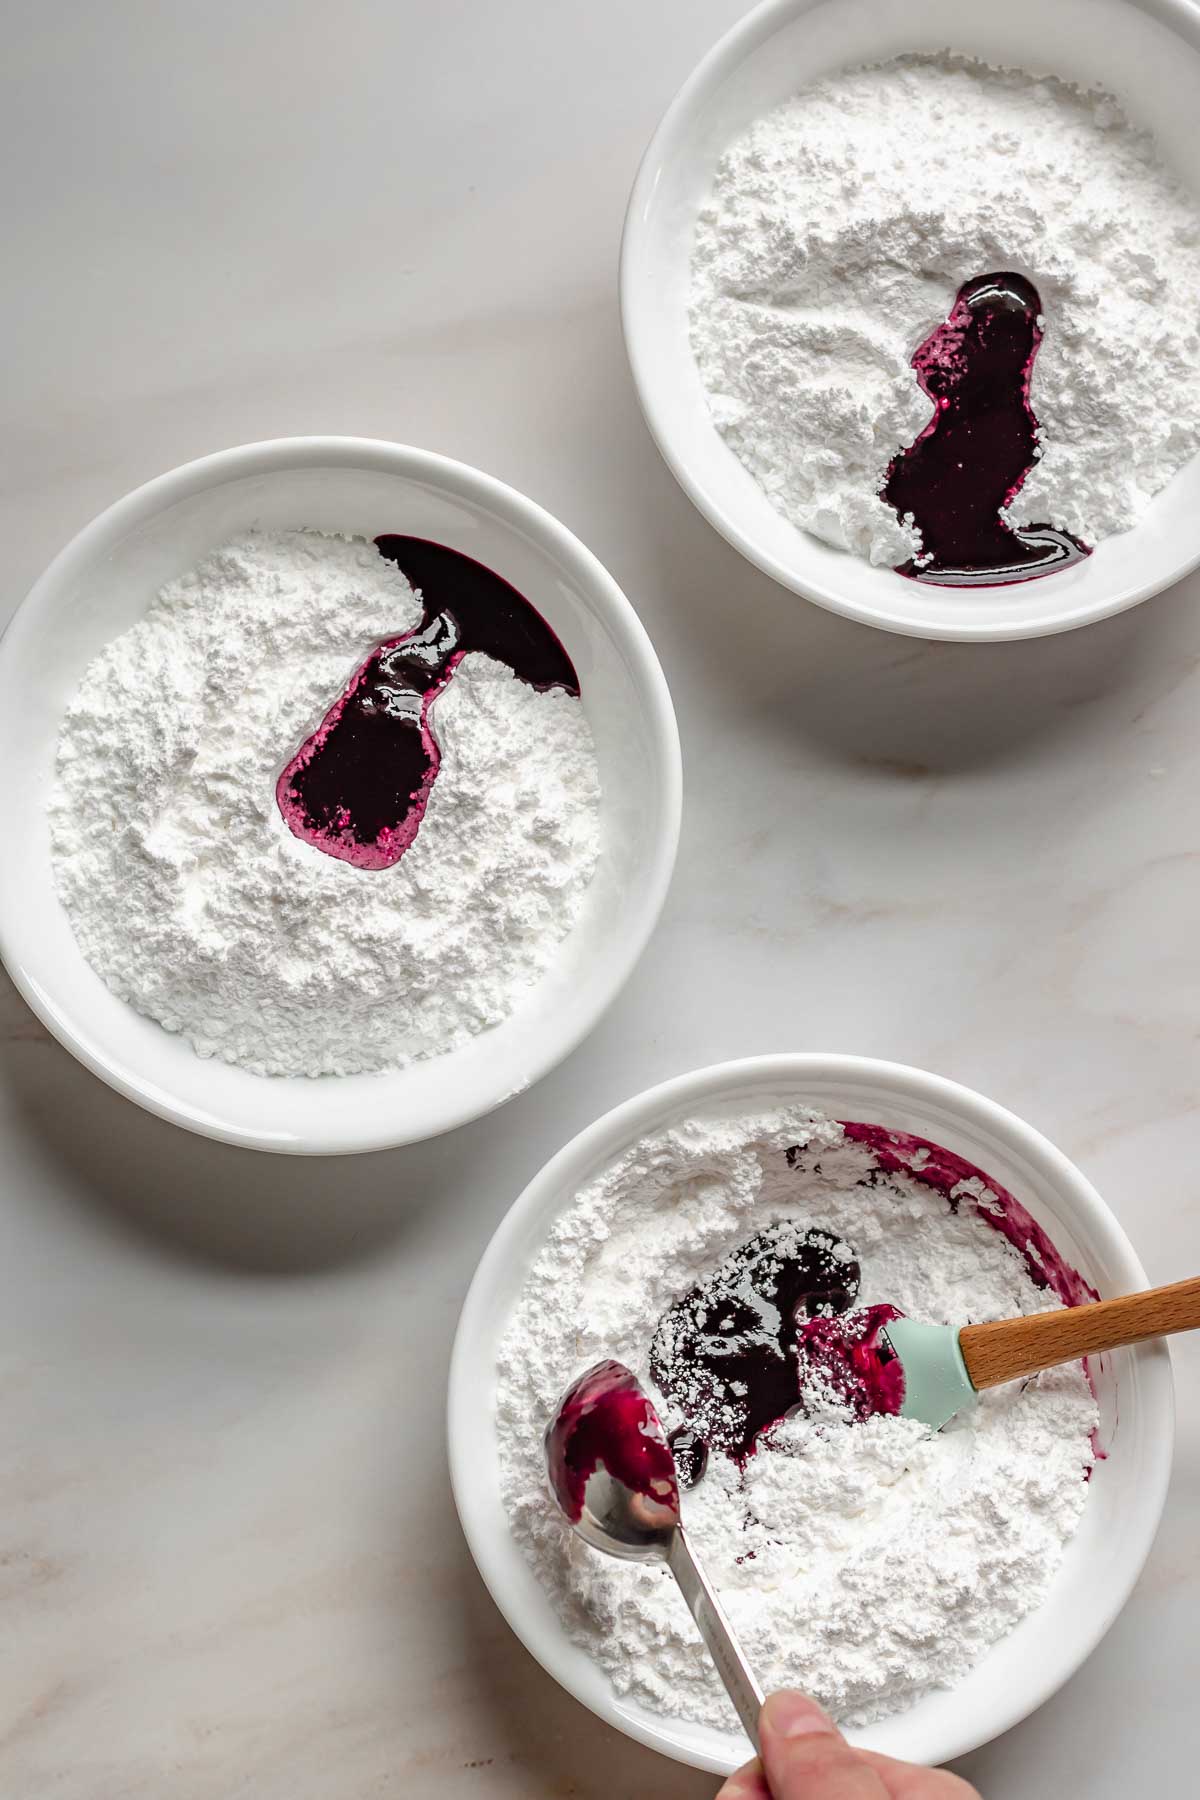 Bowls of powdered sugar with blueberry puree in them.